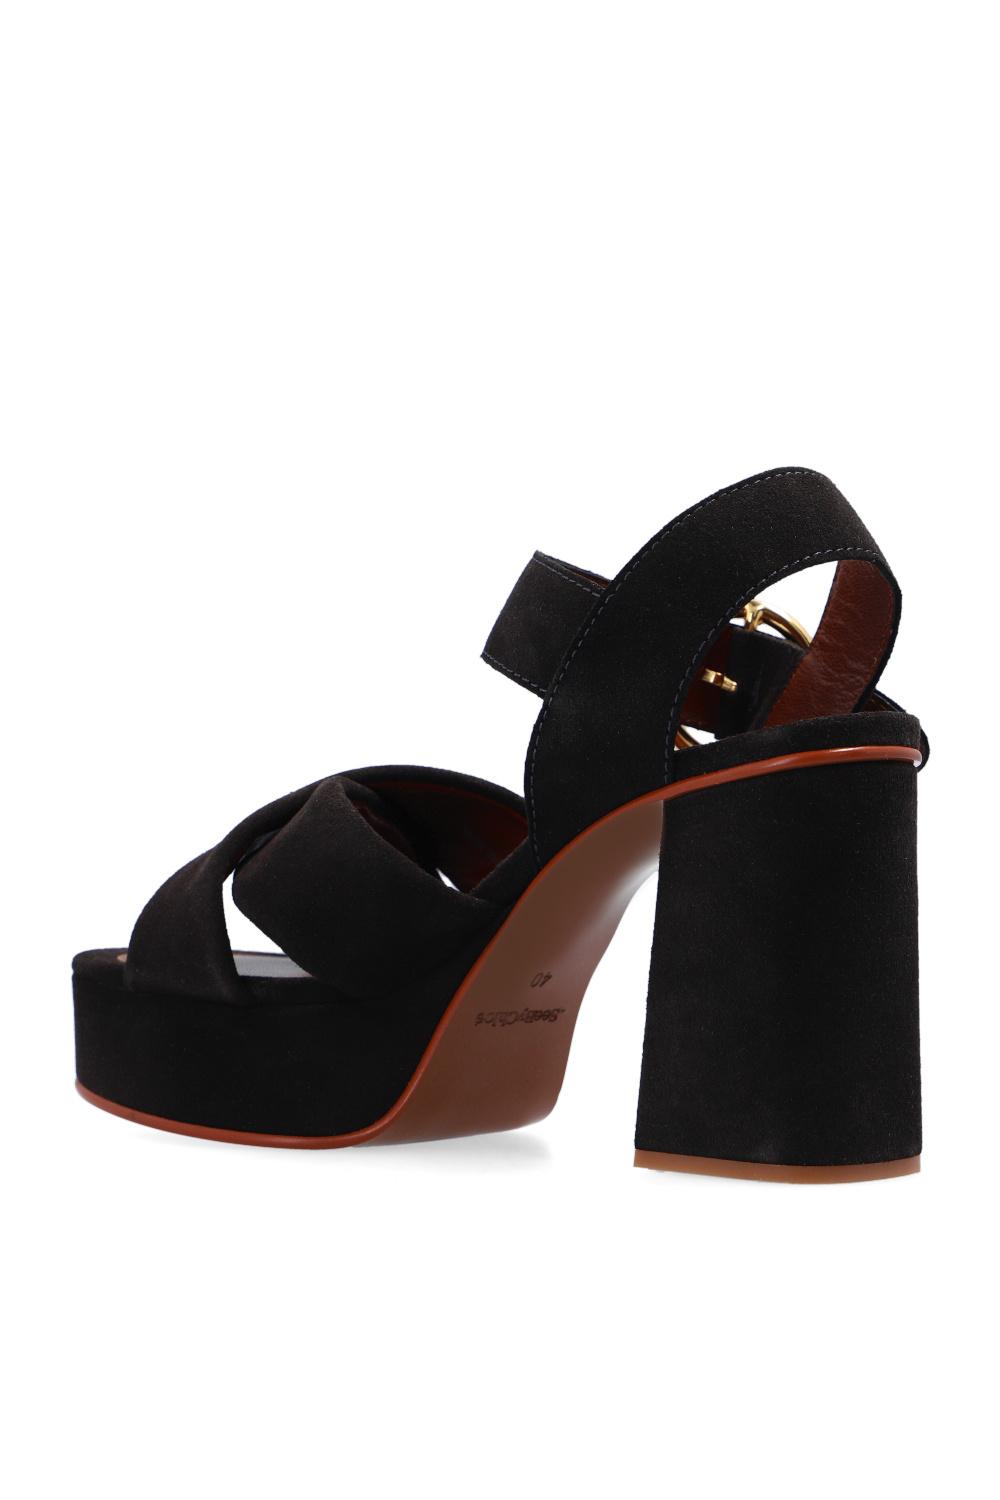 See By Chloé Platform Sandals in Brown | Lyst